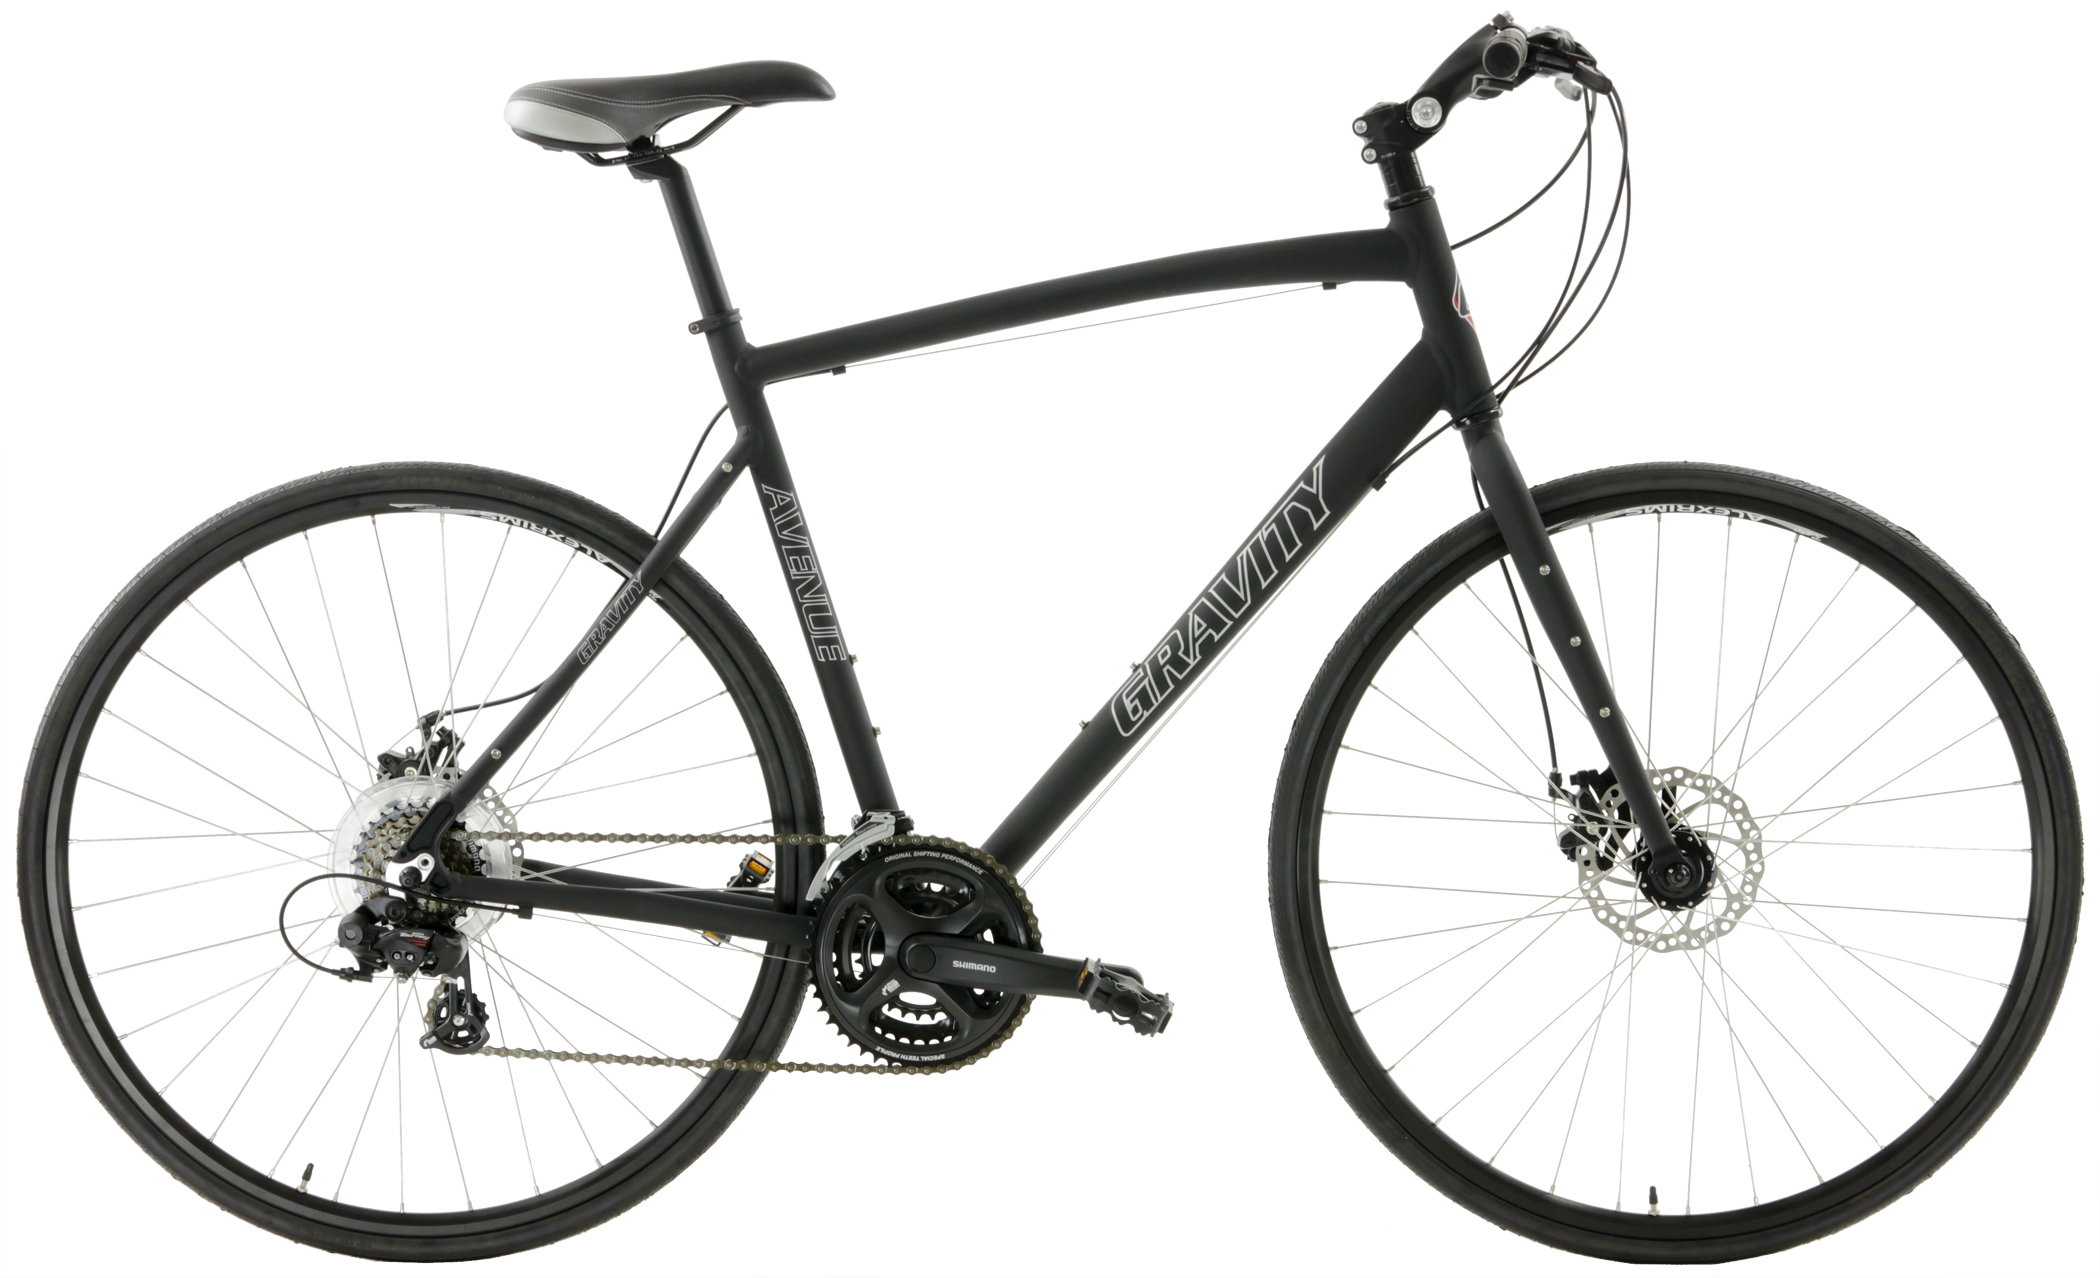 Save up to 60% off new Disc Brake Flatbar Road Bikes